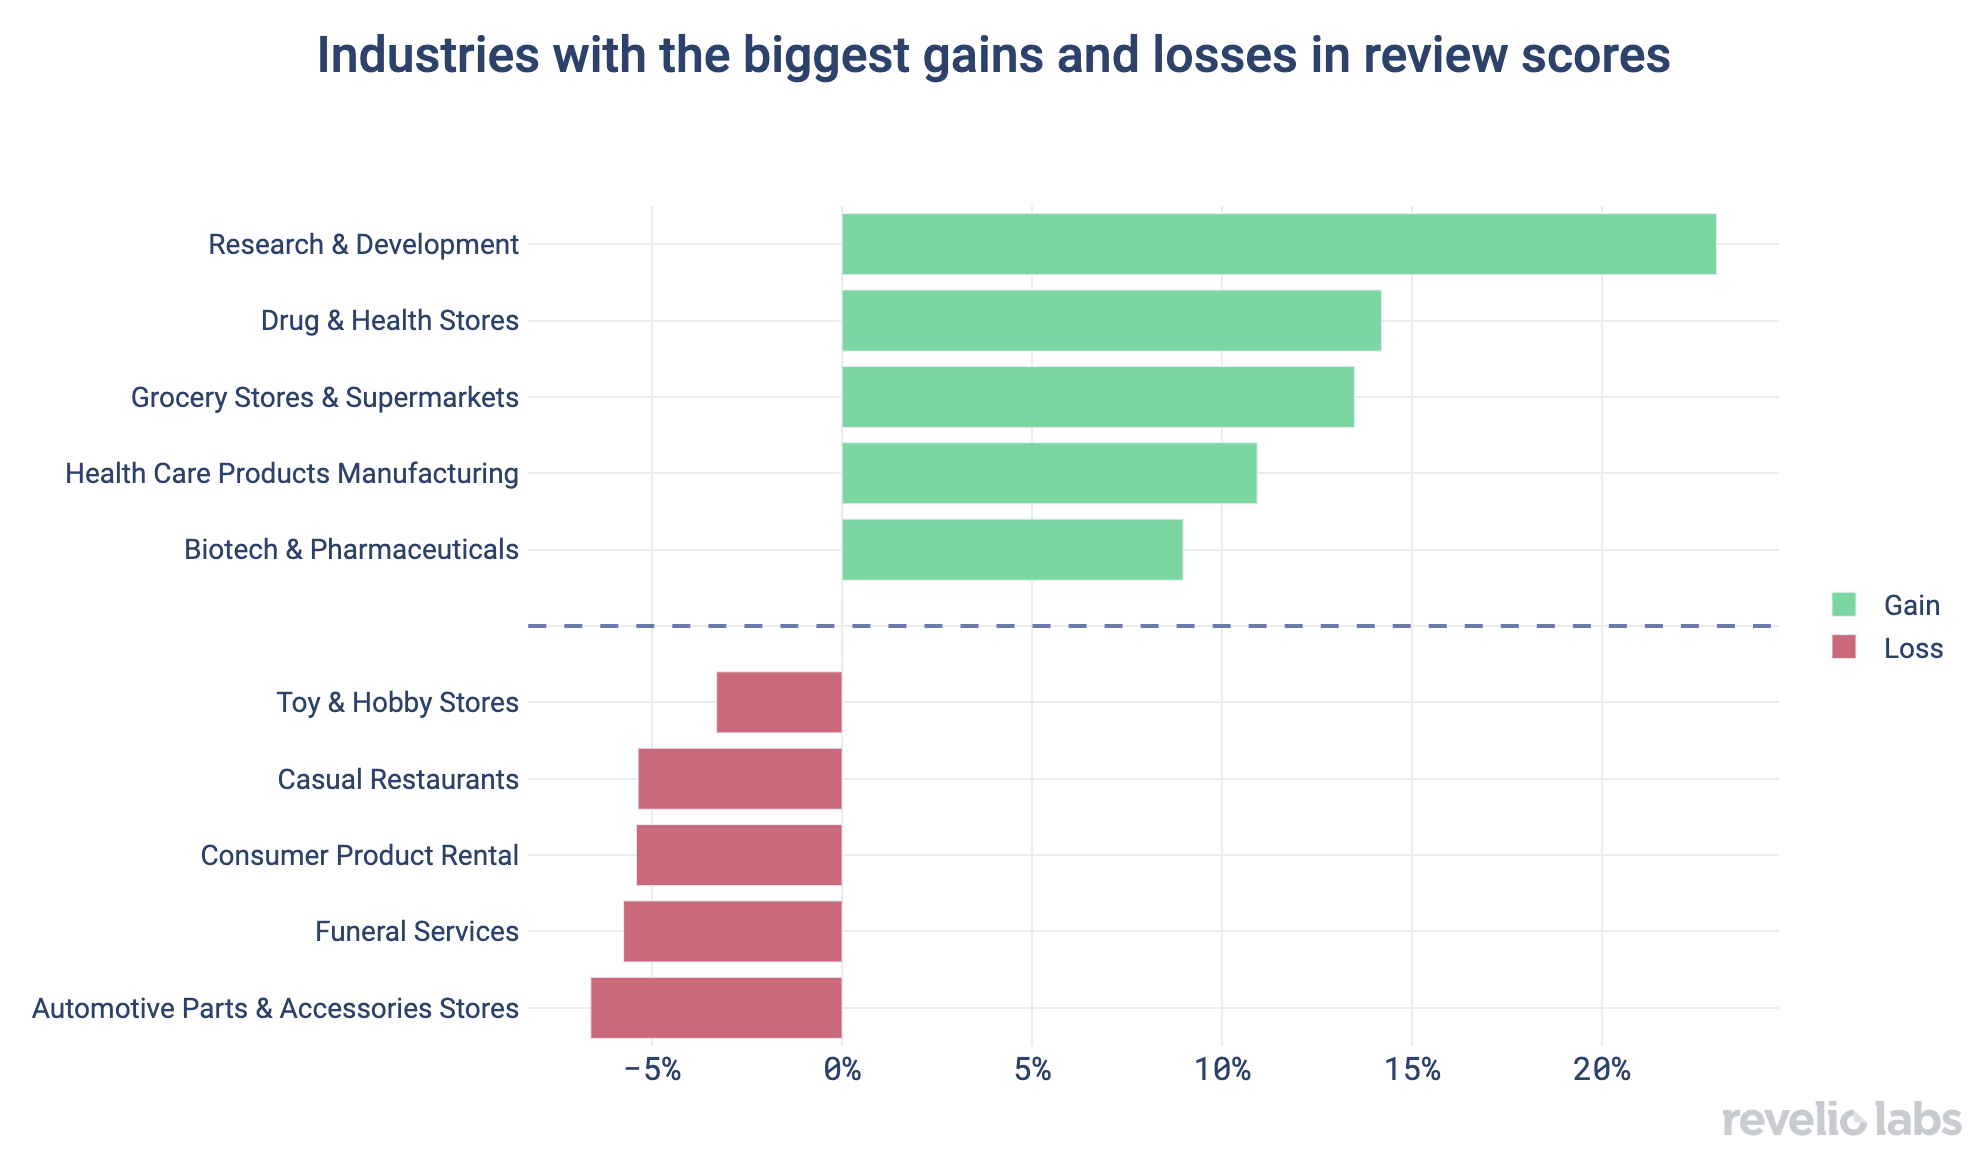 Industries with the biggest gains and losses in review scores